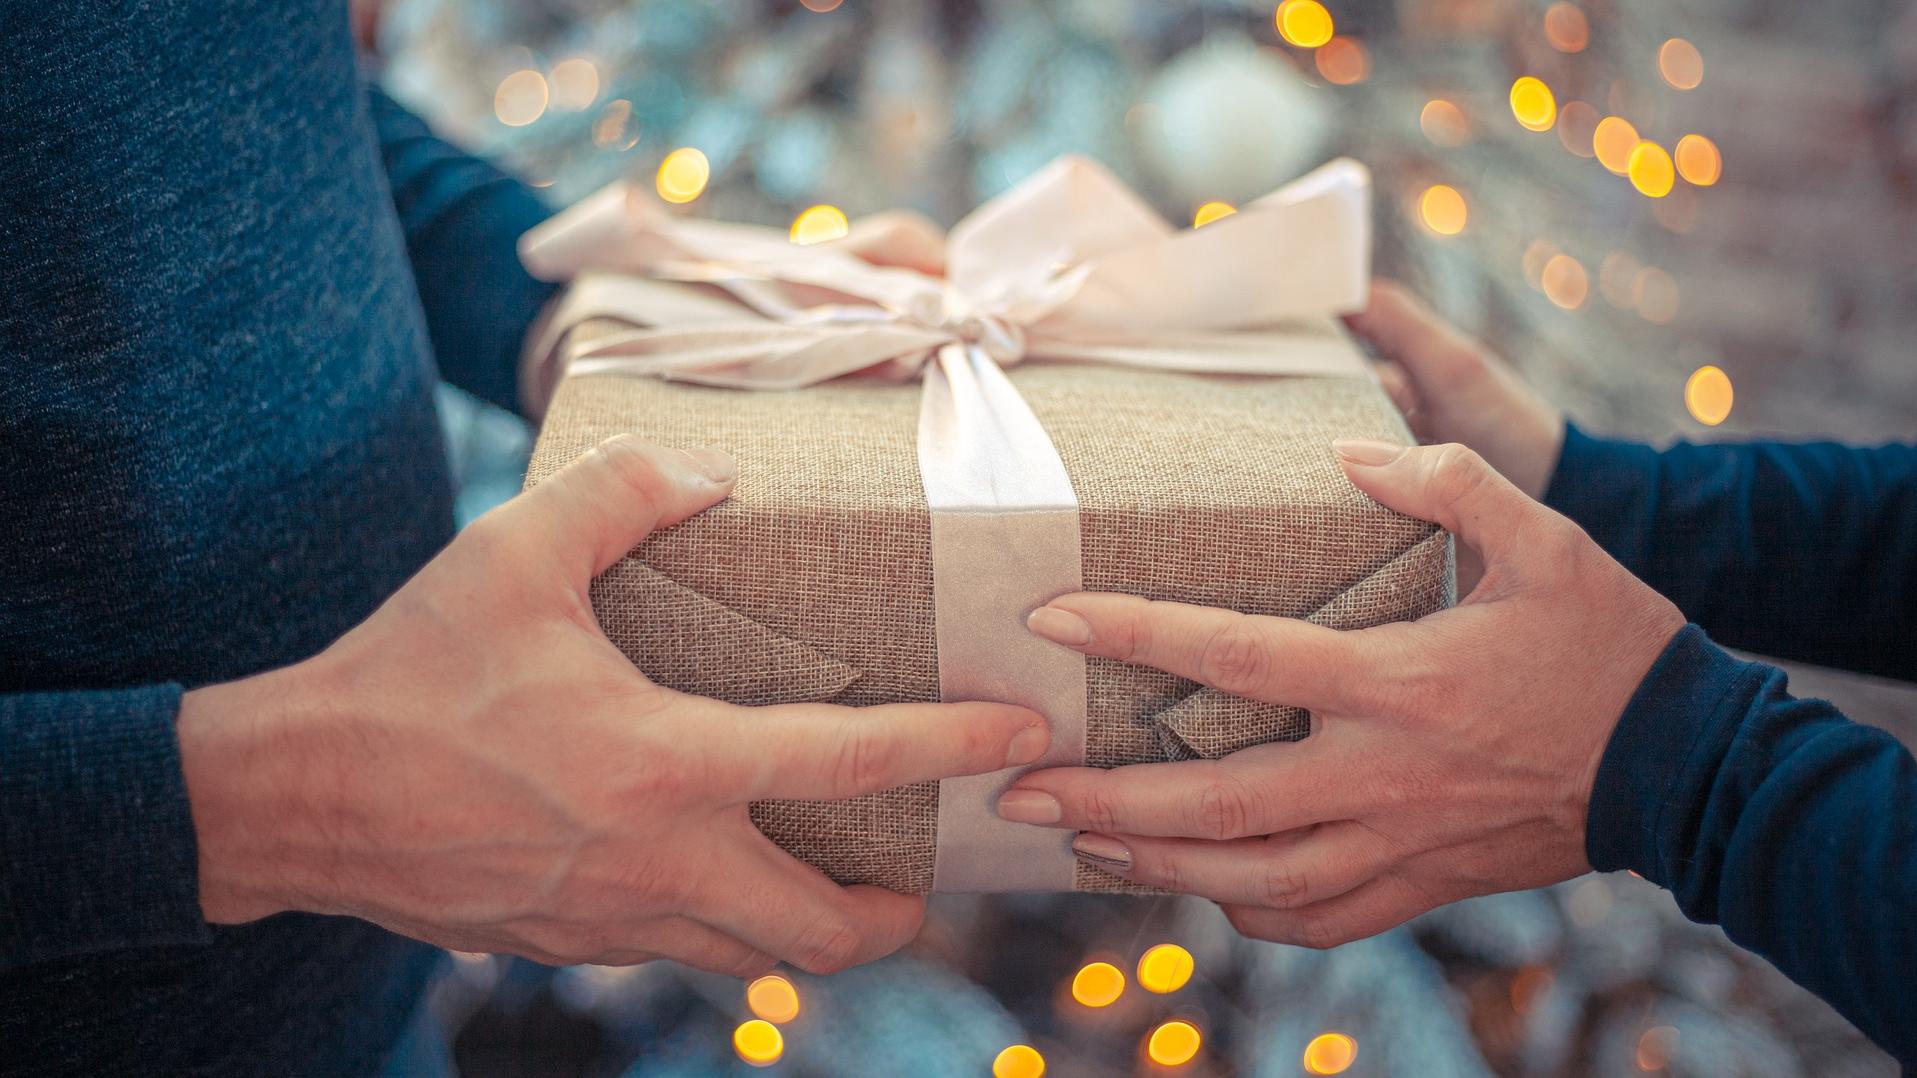 A wrapped gift being passed between two people